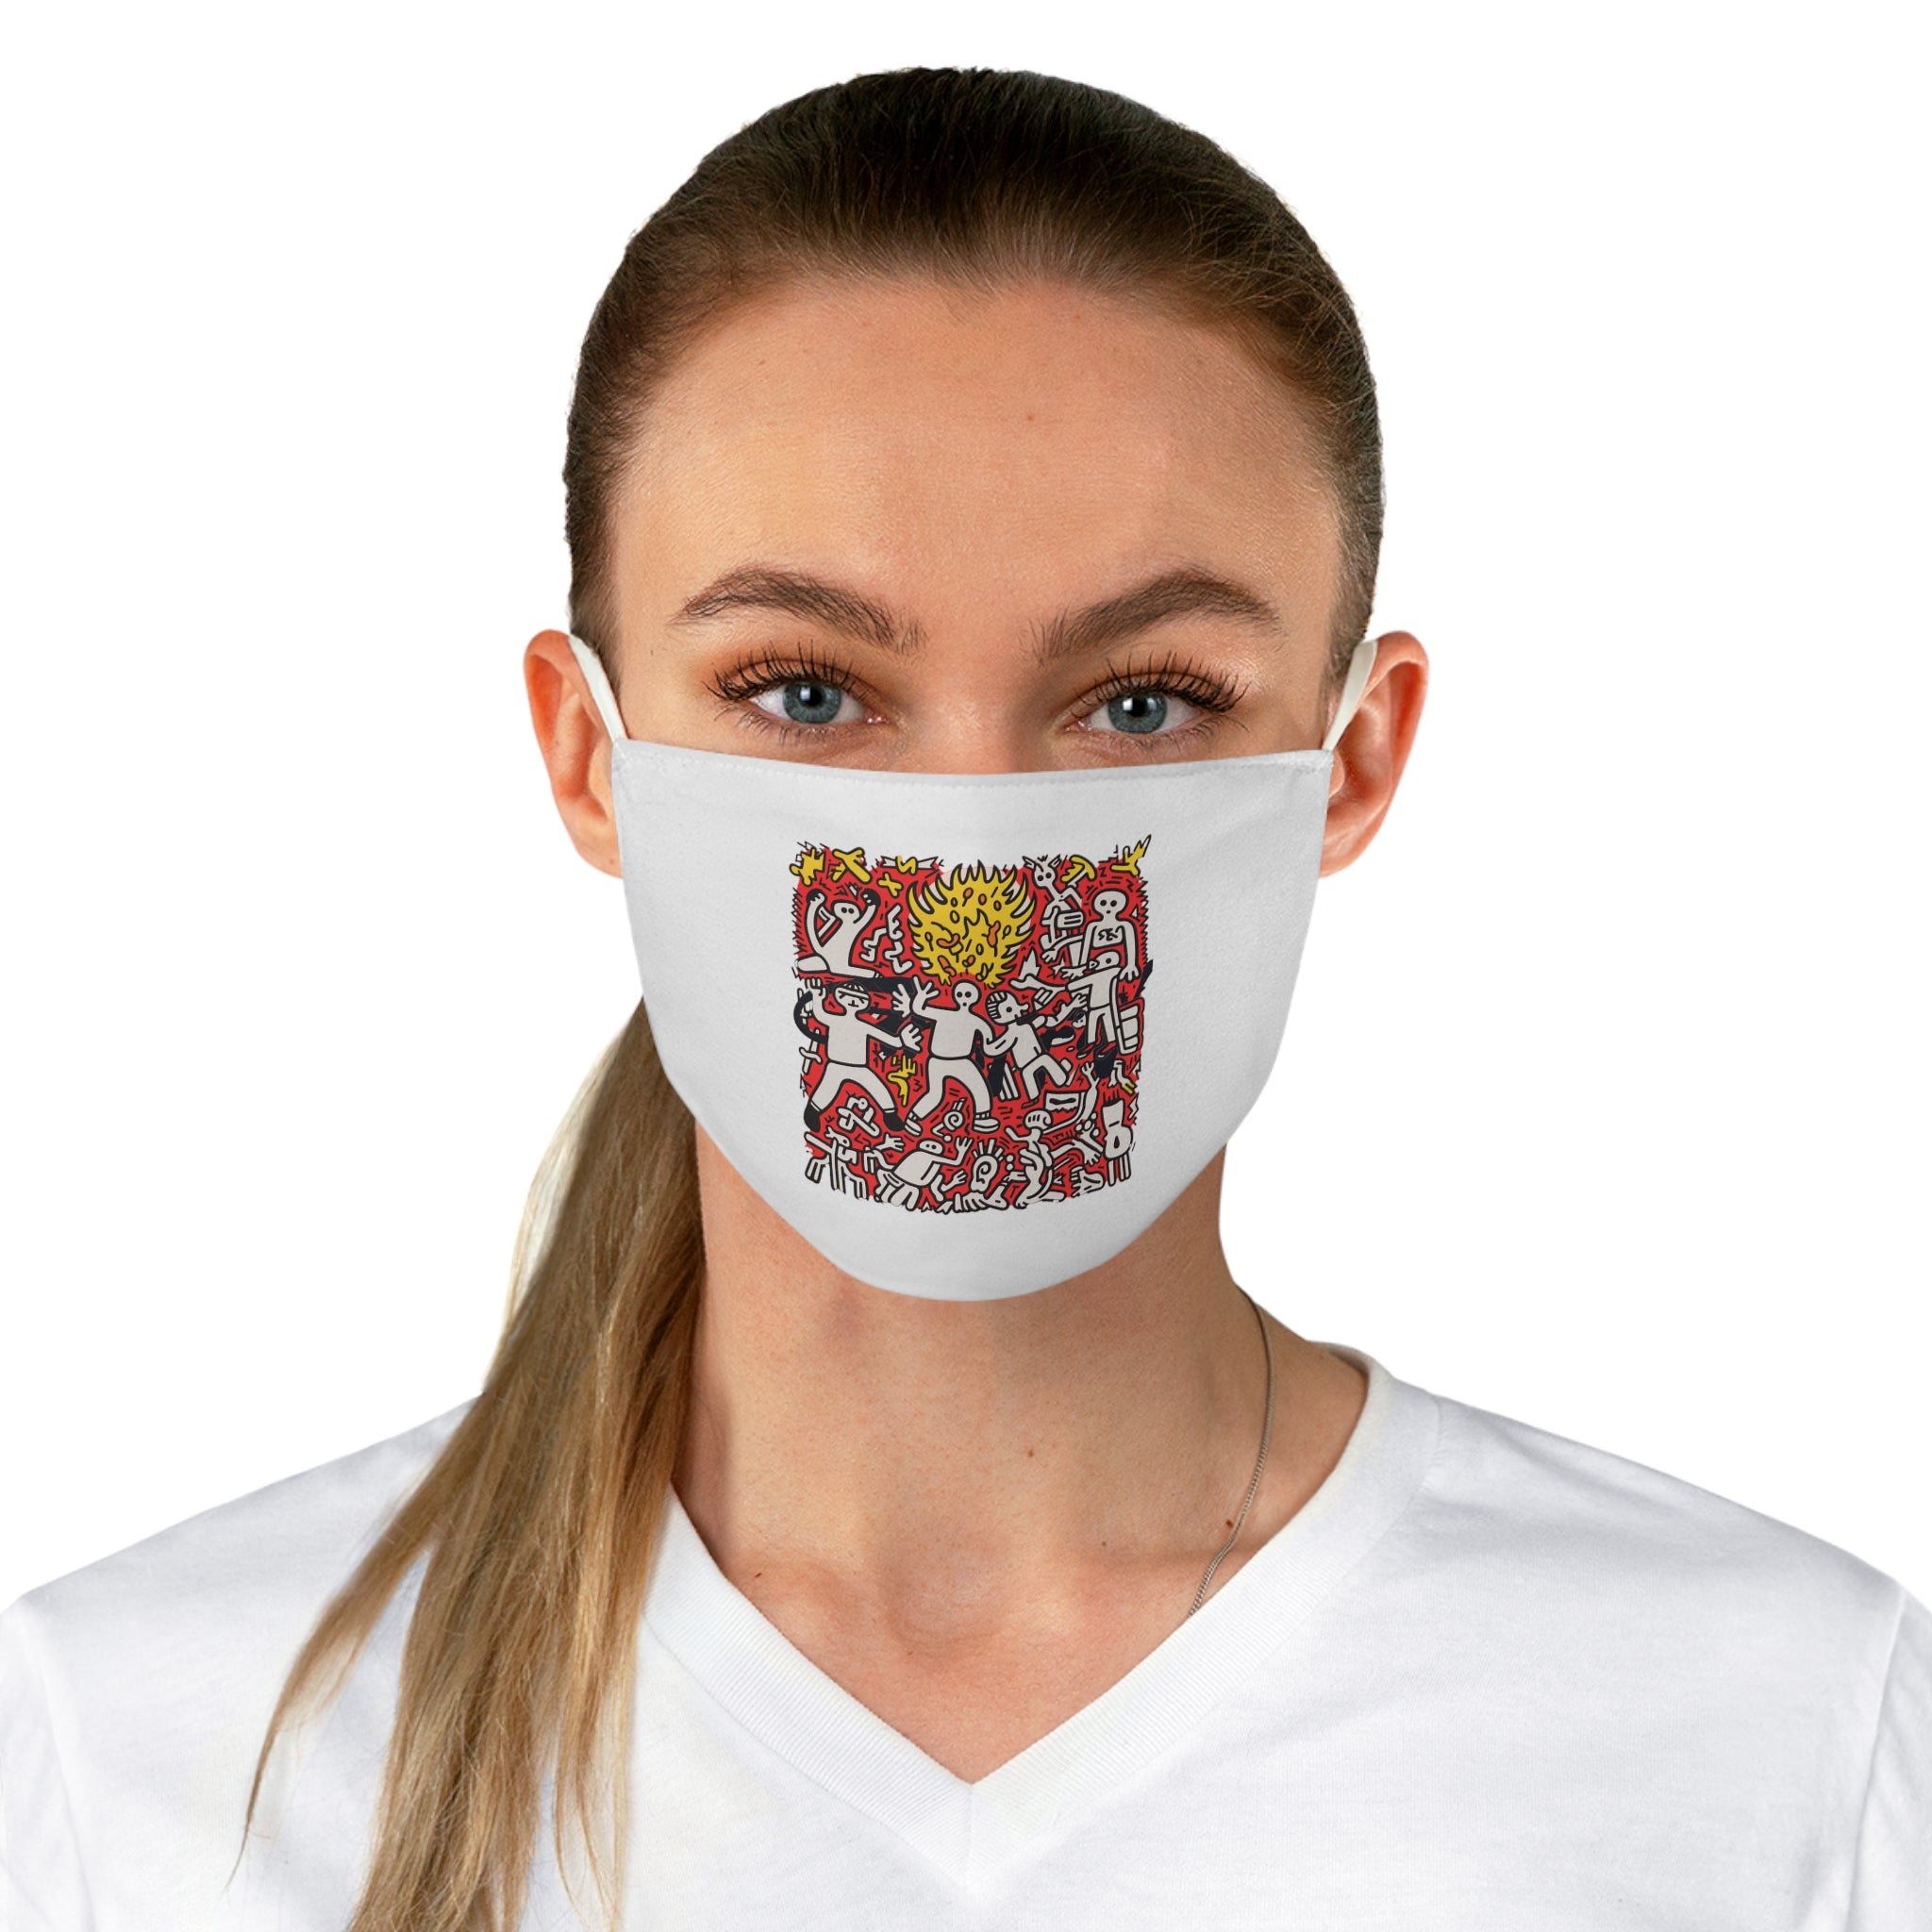 Urban Pulse: The vision of Peaceful Rebellion | Face Mask